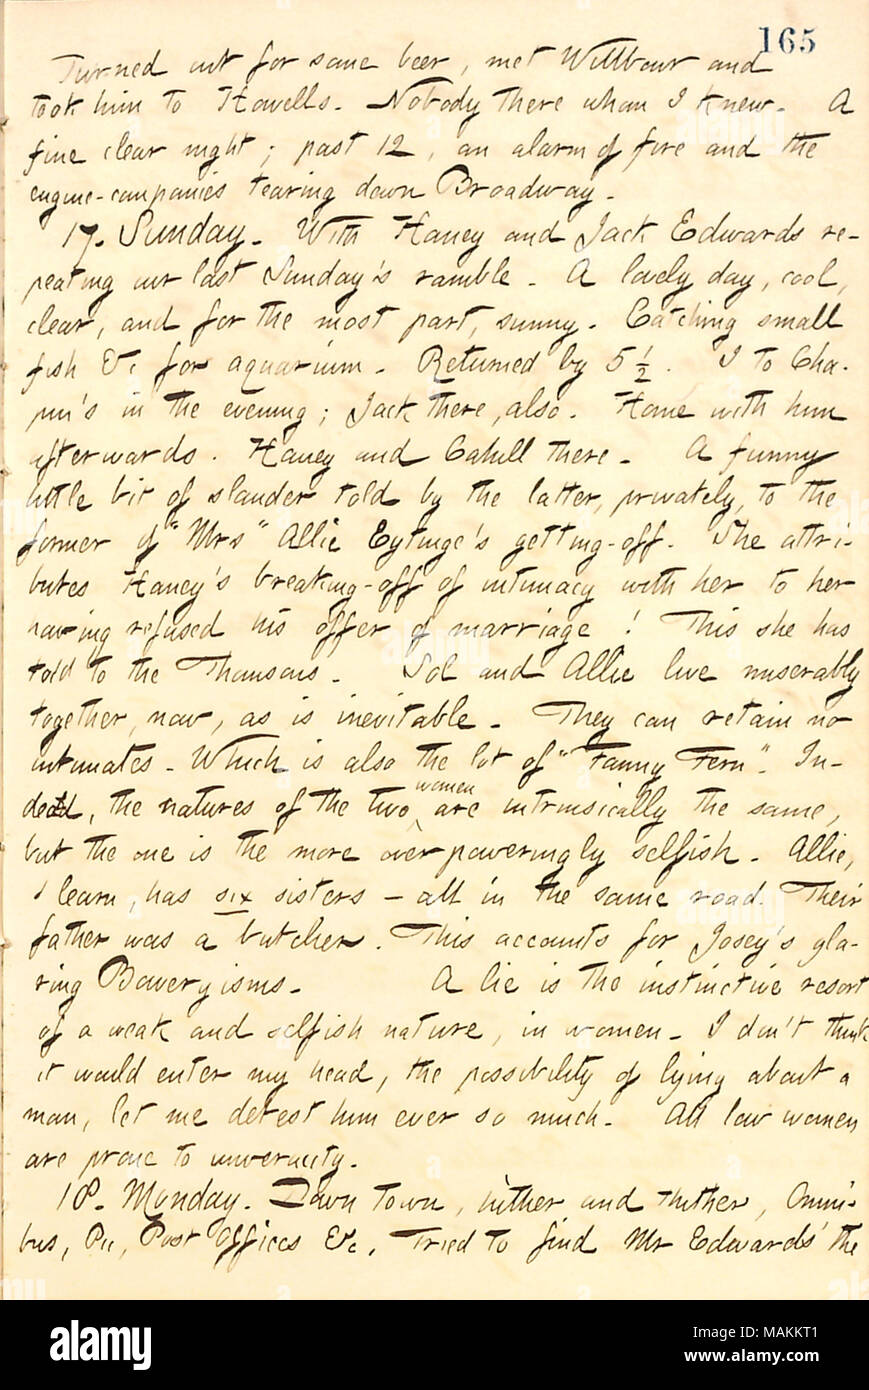 Comments on Allie Vernon and Fanny Fern.  Transcription: Turned out for some beer, met [Charles E.] Wilbour and took him to Howells. Nobody there whom I knew. A fine clear night; past 12, an alarm of fire and the engine-companies tearing down Broadway. 17. Sunday. With [Jesse] Haney and Jack Edwards repeating our last Sunday's ramble. A lovely day, cool, clear, and for the most part, sunny. Catching small fish &c for aquarium. Returned by 5 1/2. I to [E.H.] Chapin's in the evening; Jack there, also. Home with him afterwards. Haney and [Frank] Cahill there. A funny little bit of slander told by Stock Photo